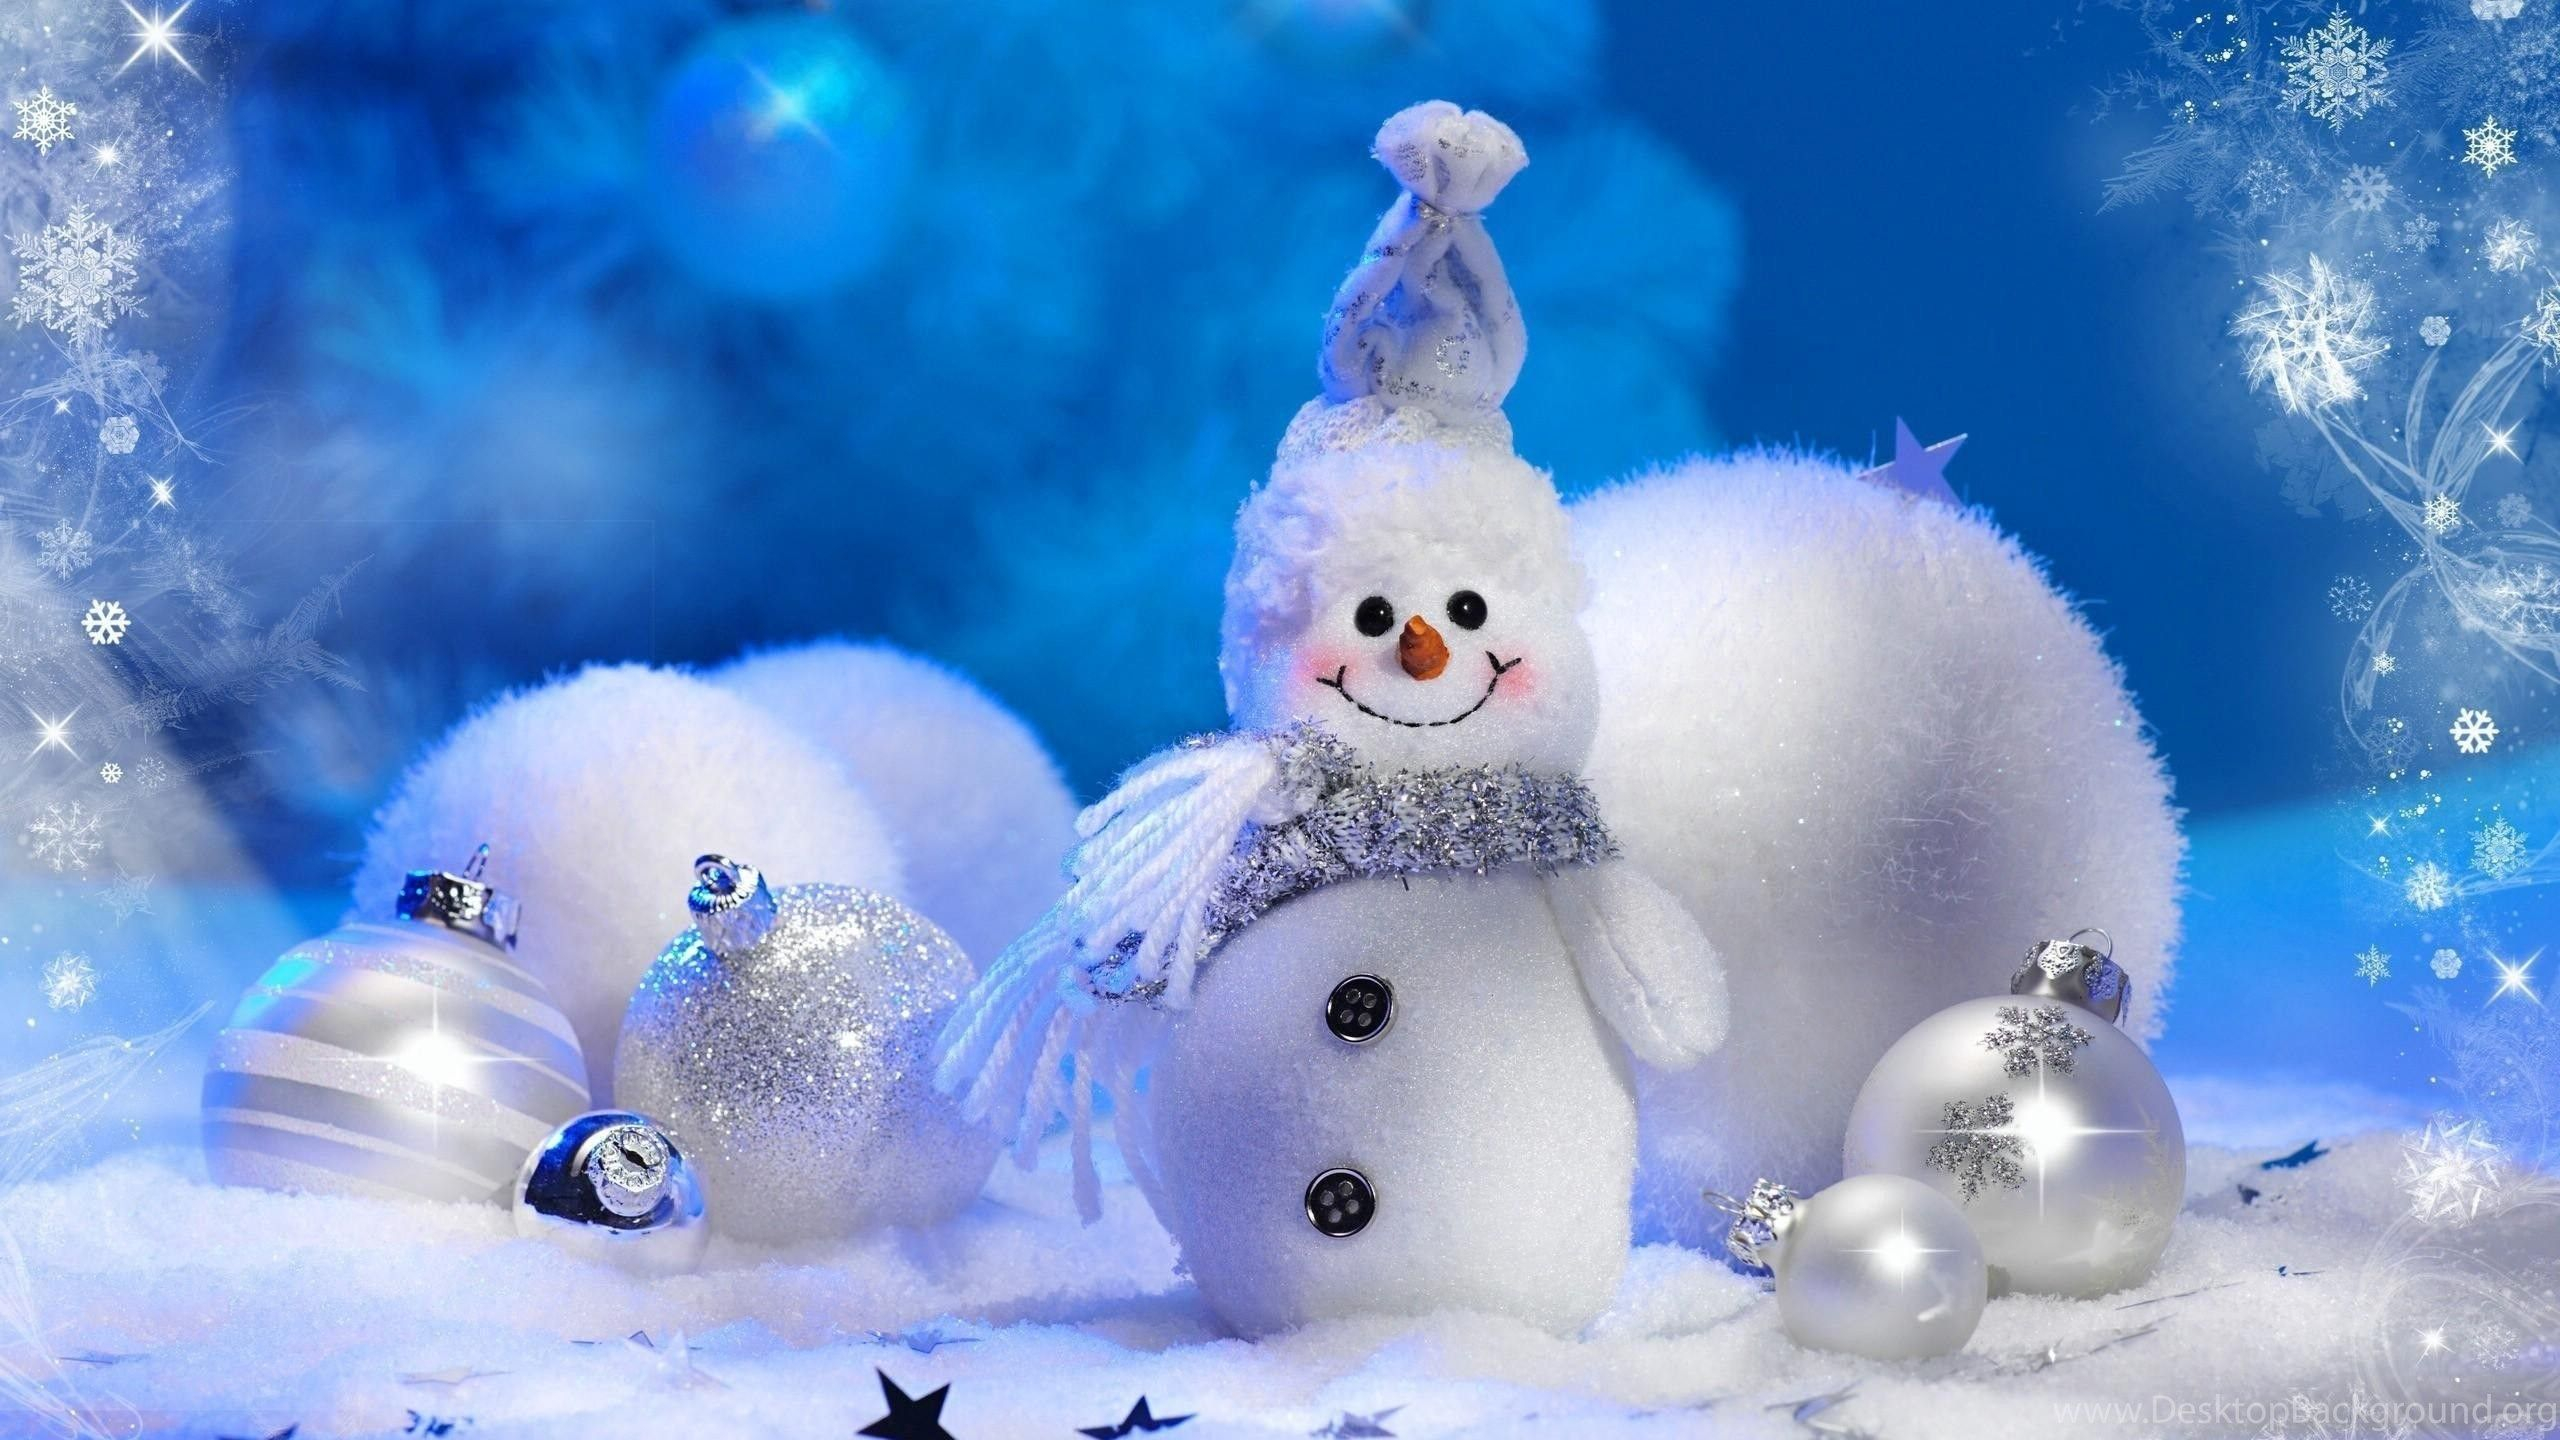 2560x1440 Christmas Snow Scenes Wallpapers Top Free Christmas Snow Scenes Backgrounds